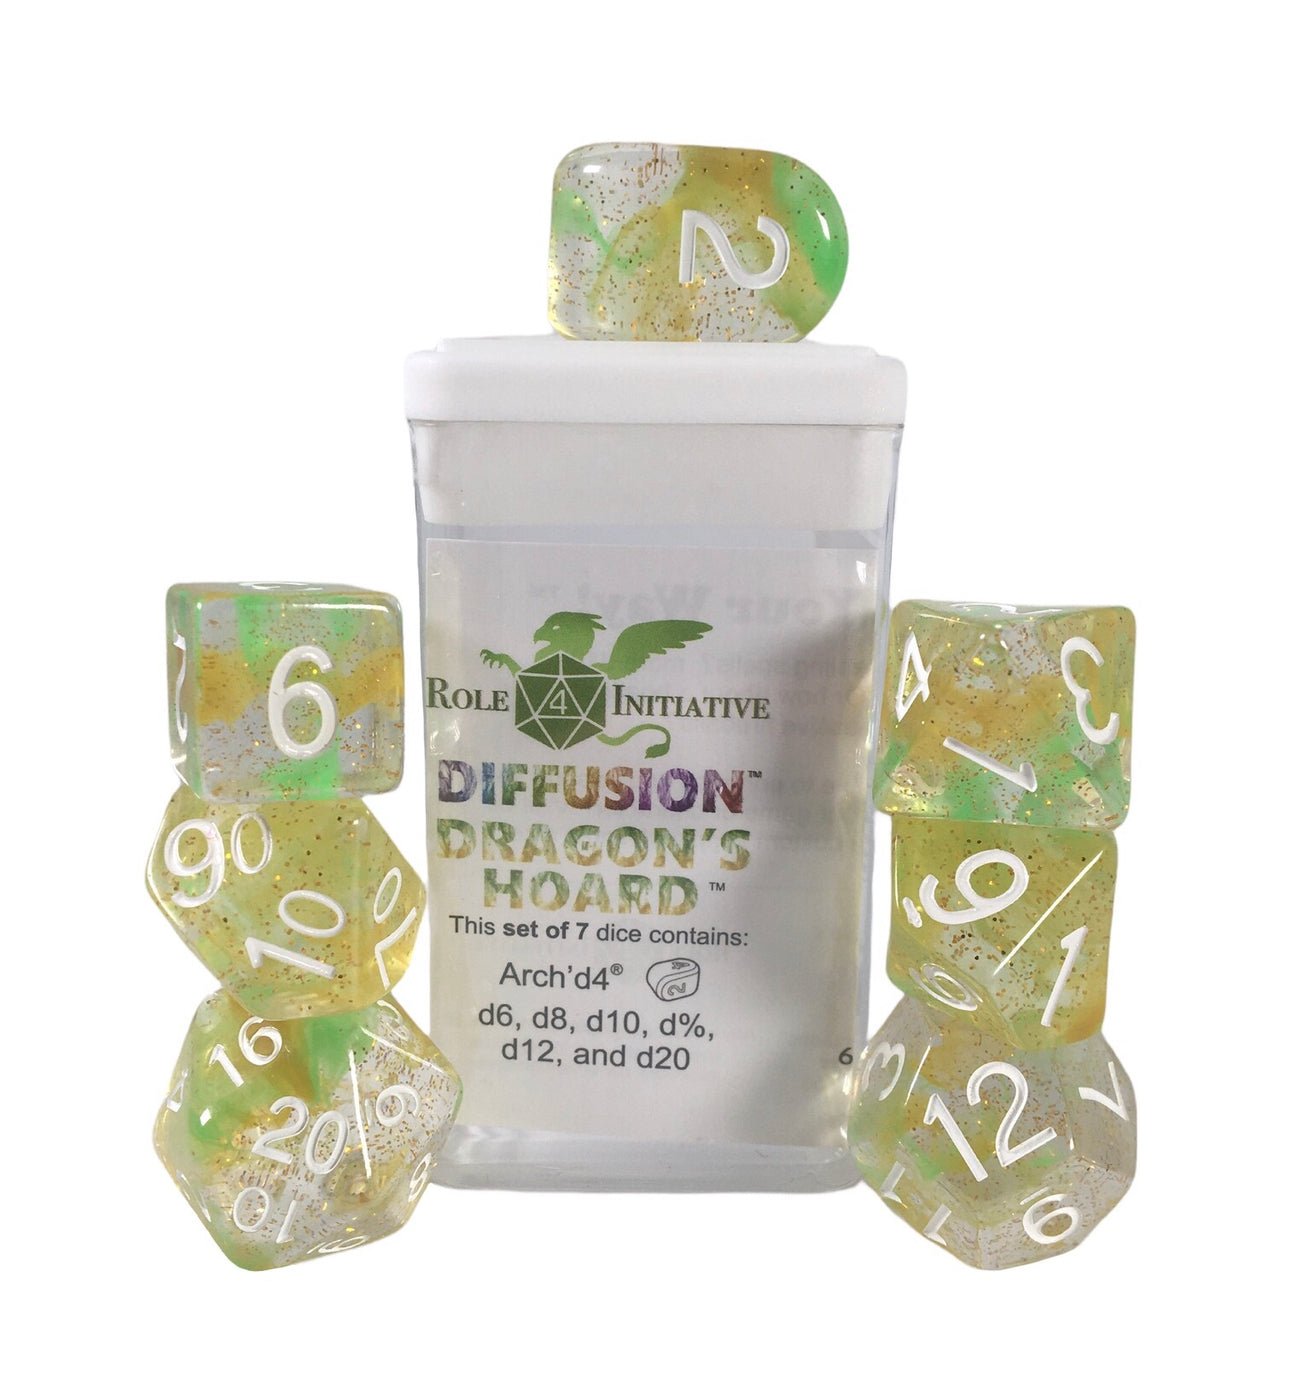 Diffusion Dragon's Hoard - 7 dice set (with Arch’d4™) - The Fourth Place